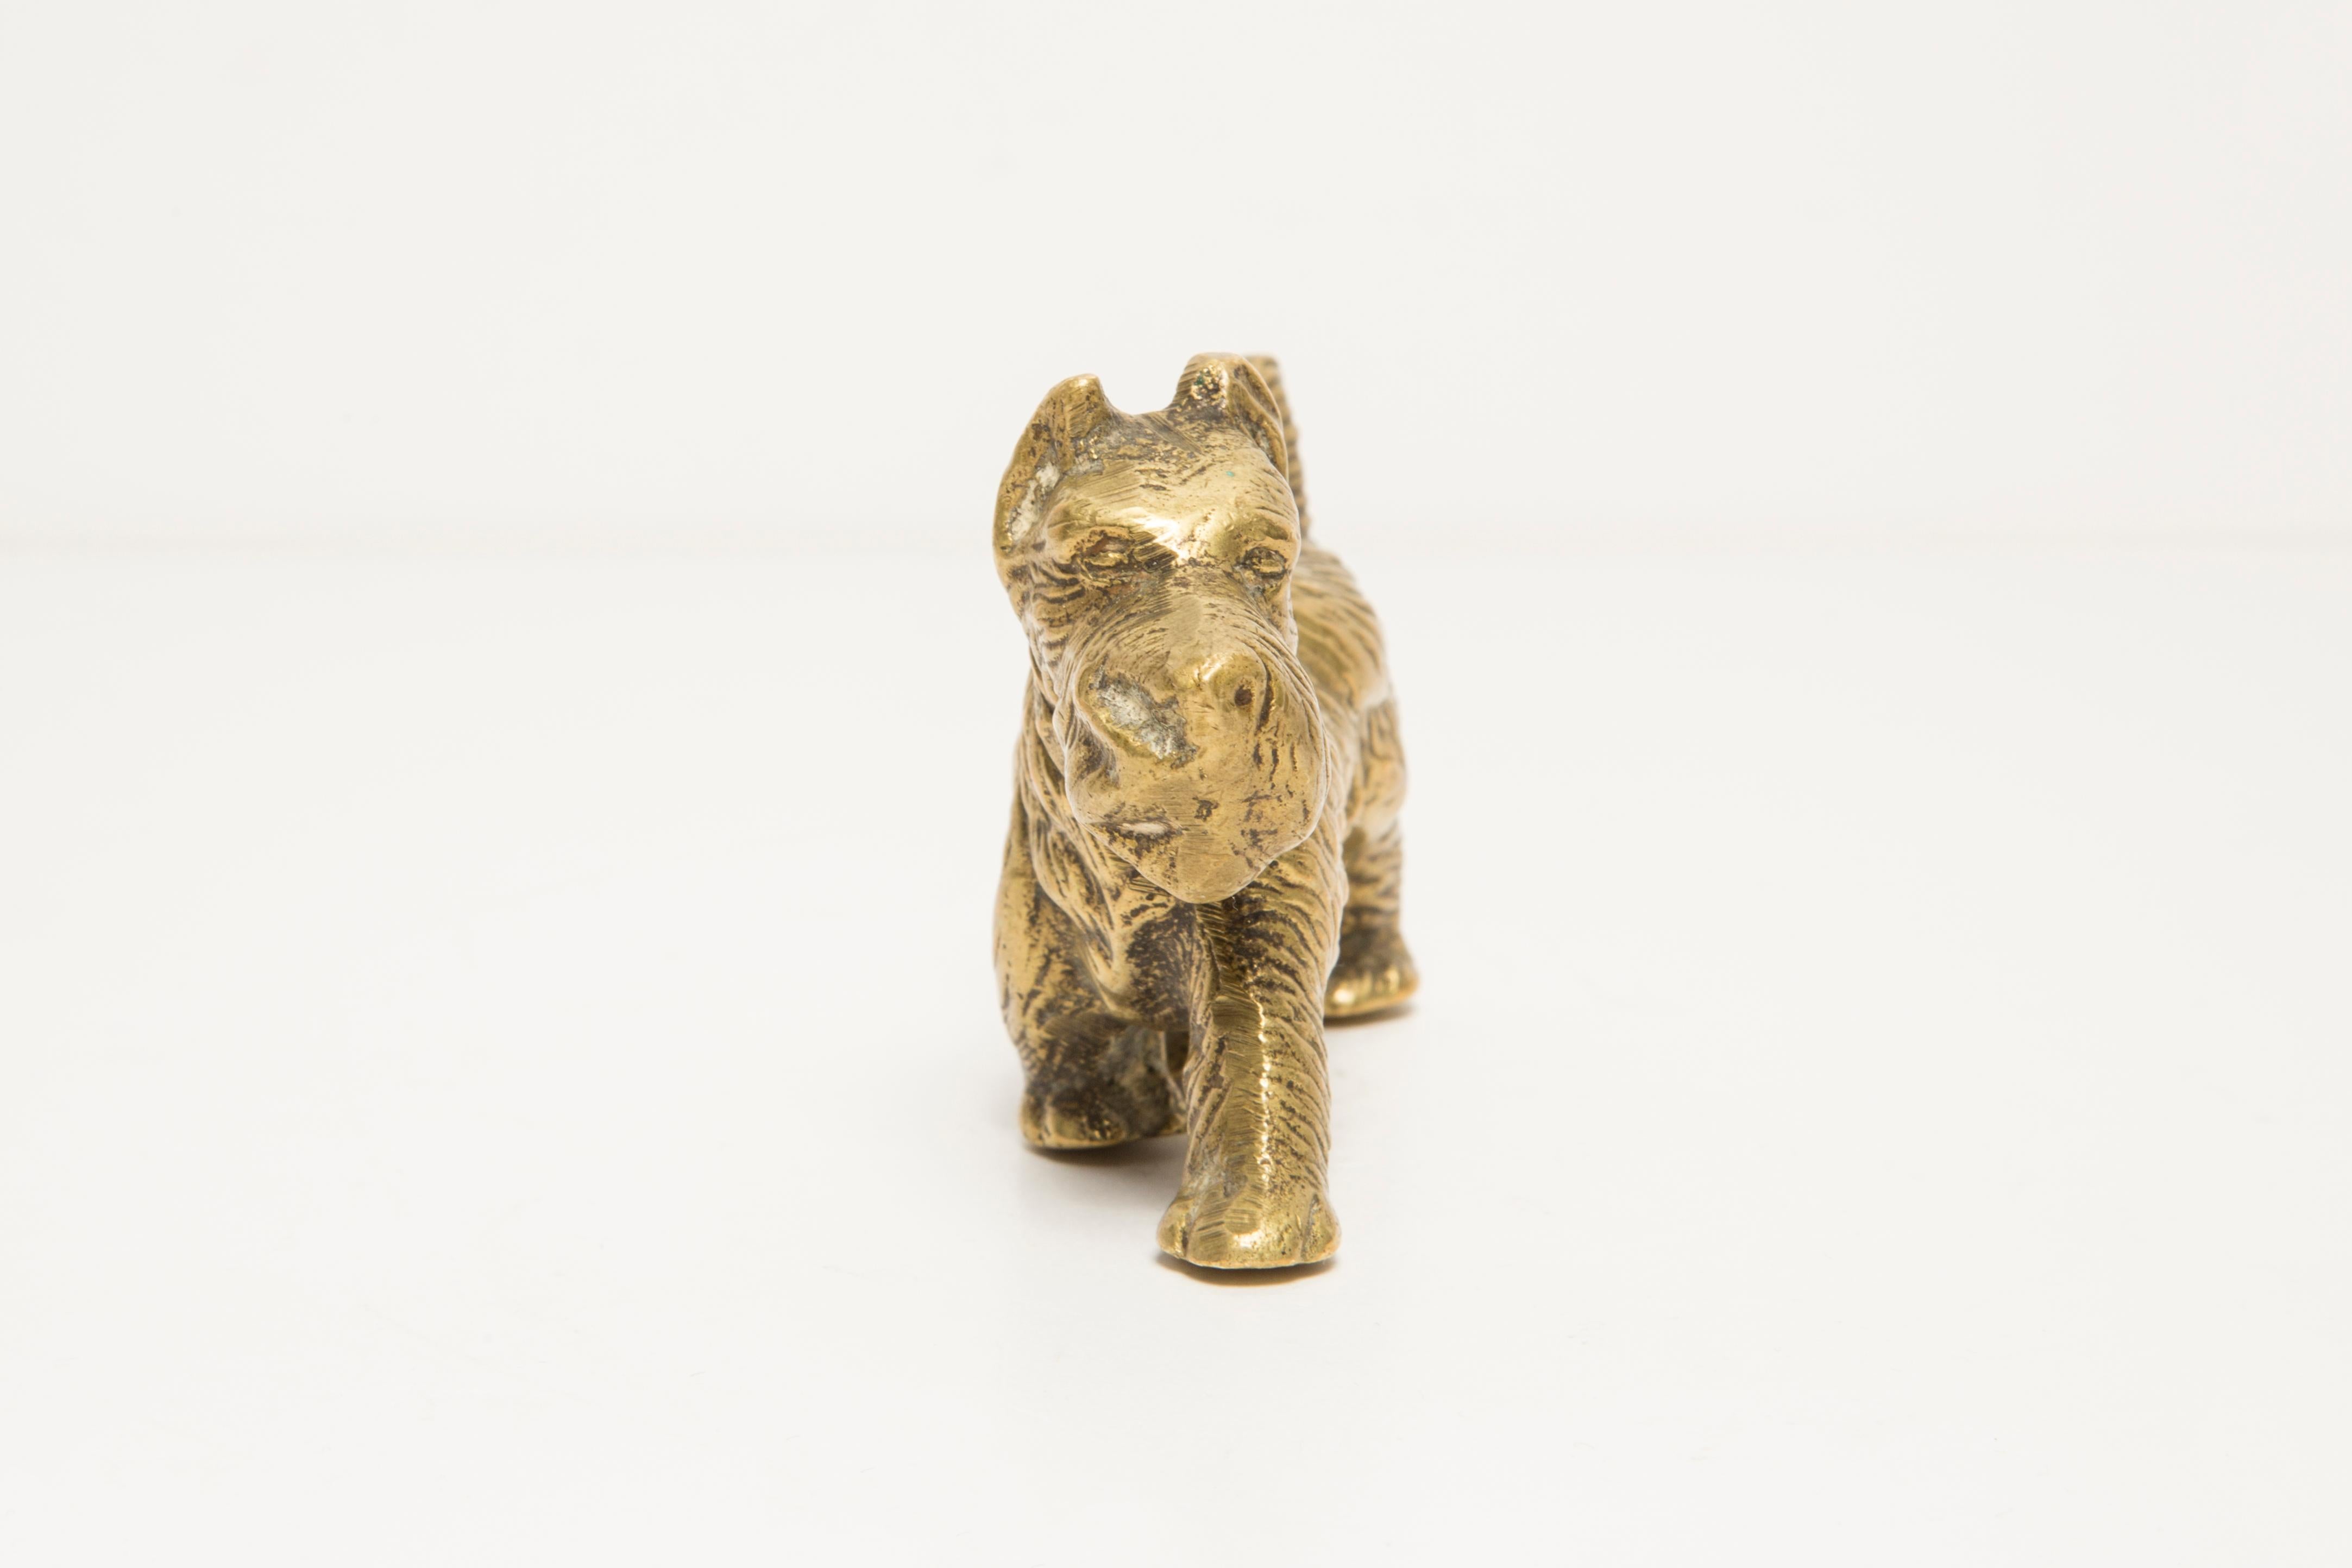 Italian Midcentury West Terrier Dog Gold Metal Decorative Sculpture, Italy, 1950s For Sale